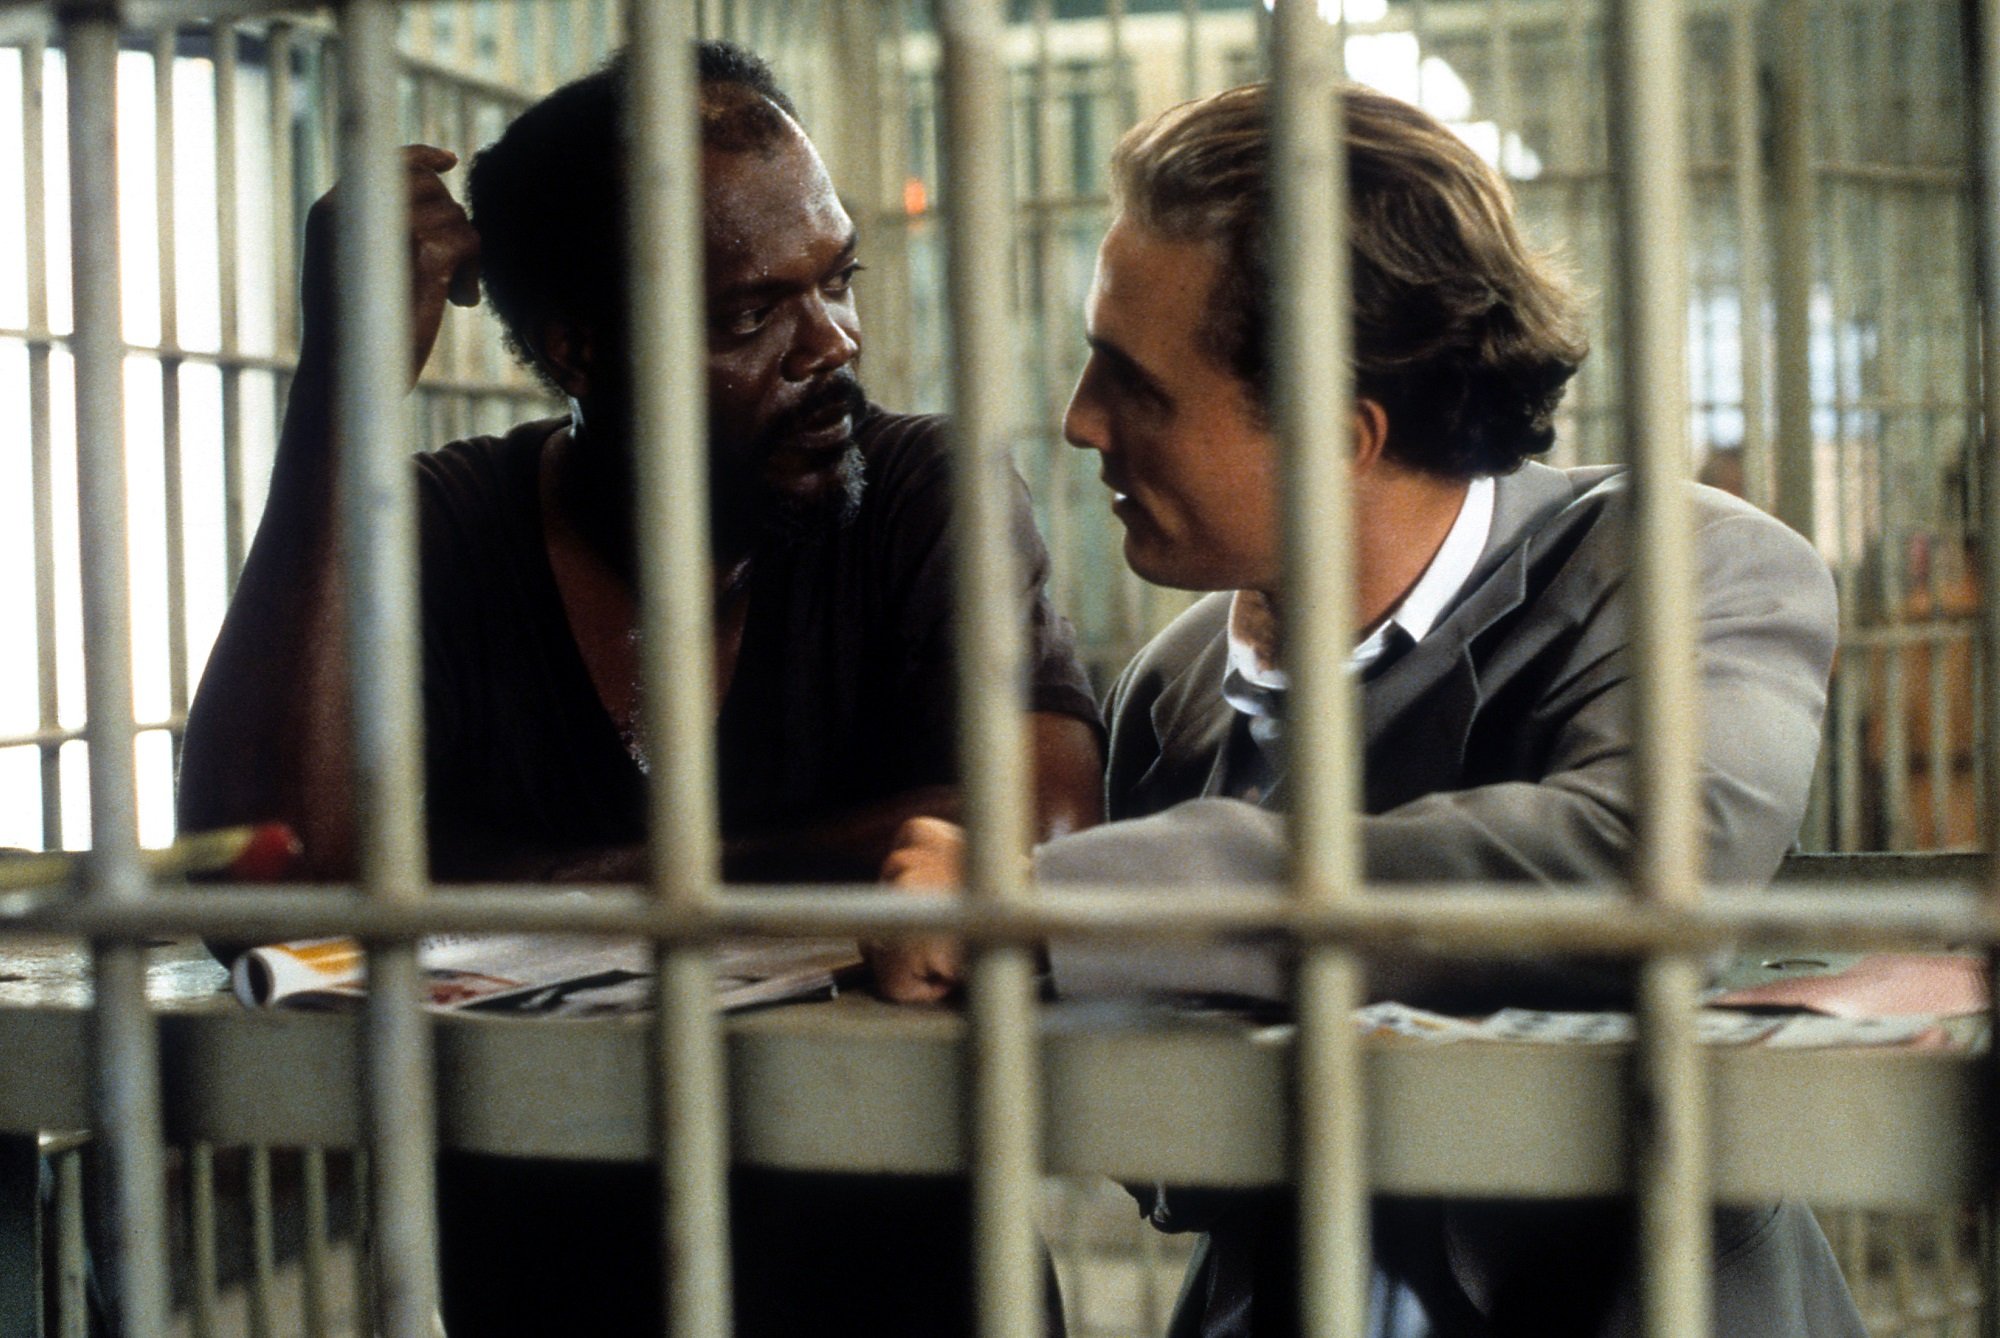 A Time to Kill stars Matthew McConaughey and Samuel L. Jackson in a jail cell